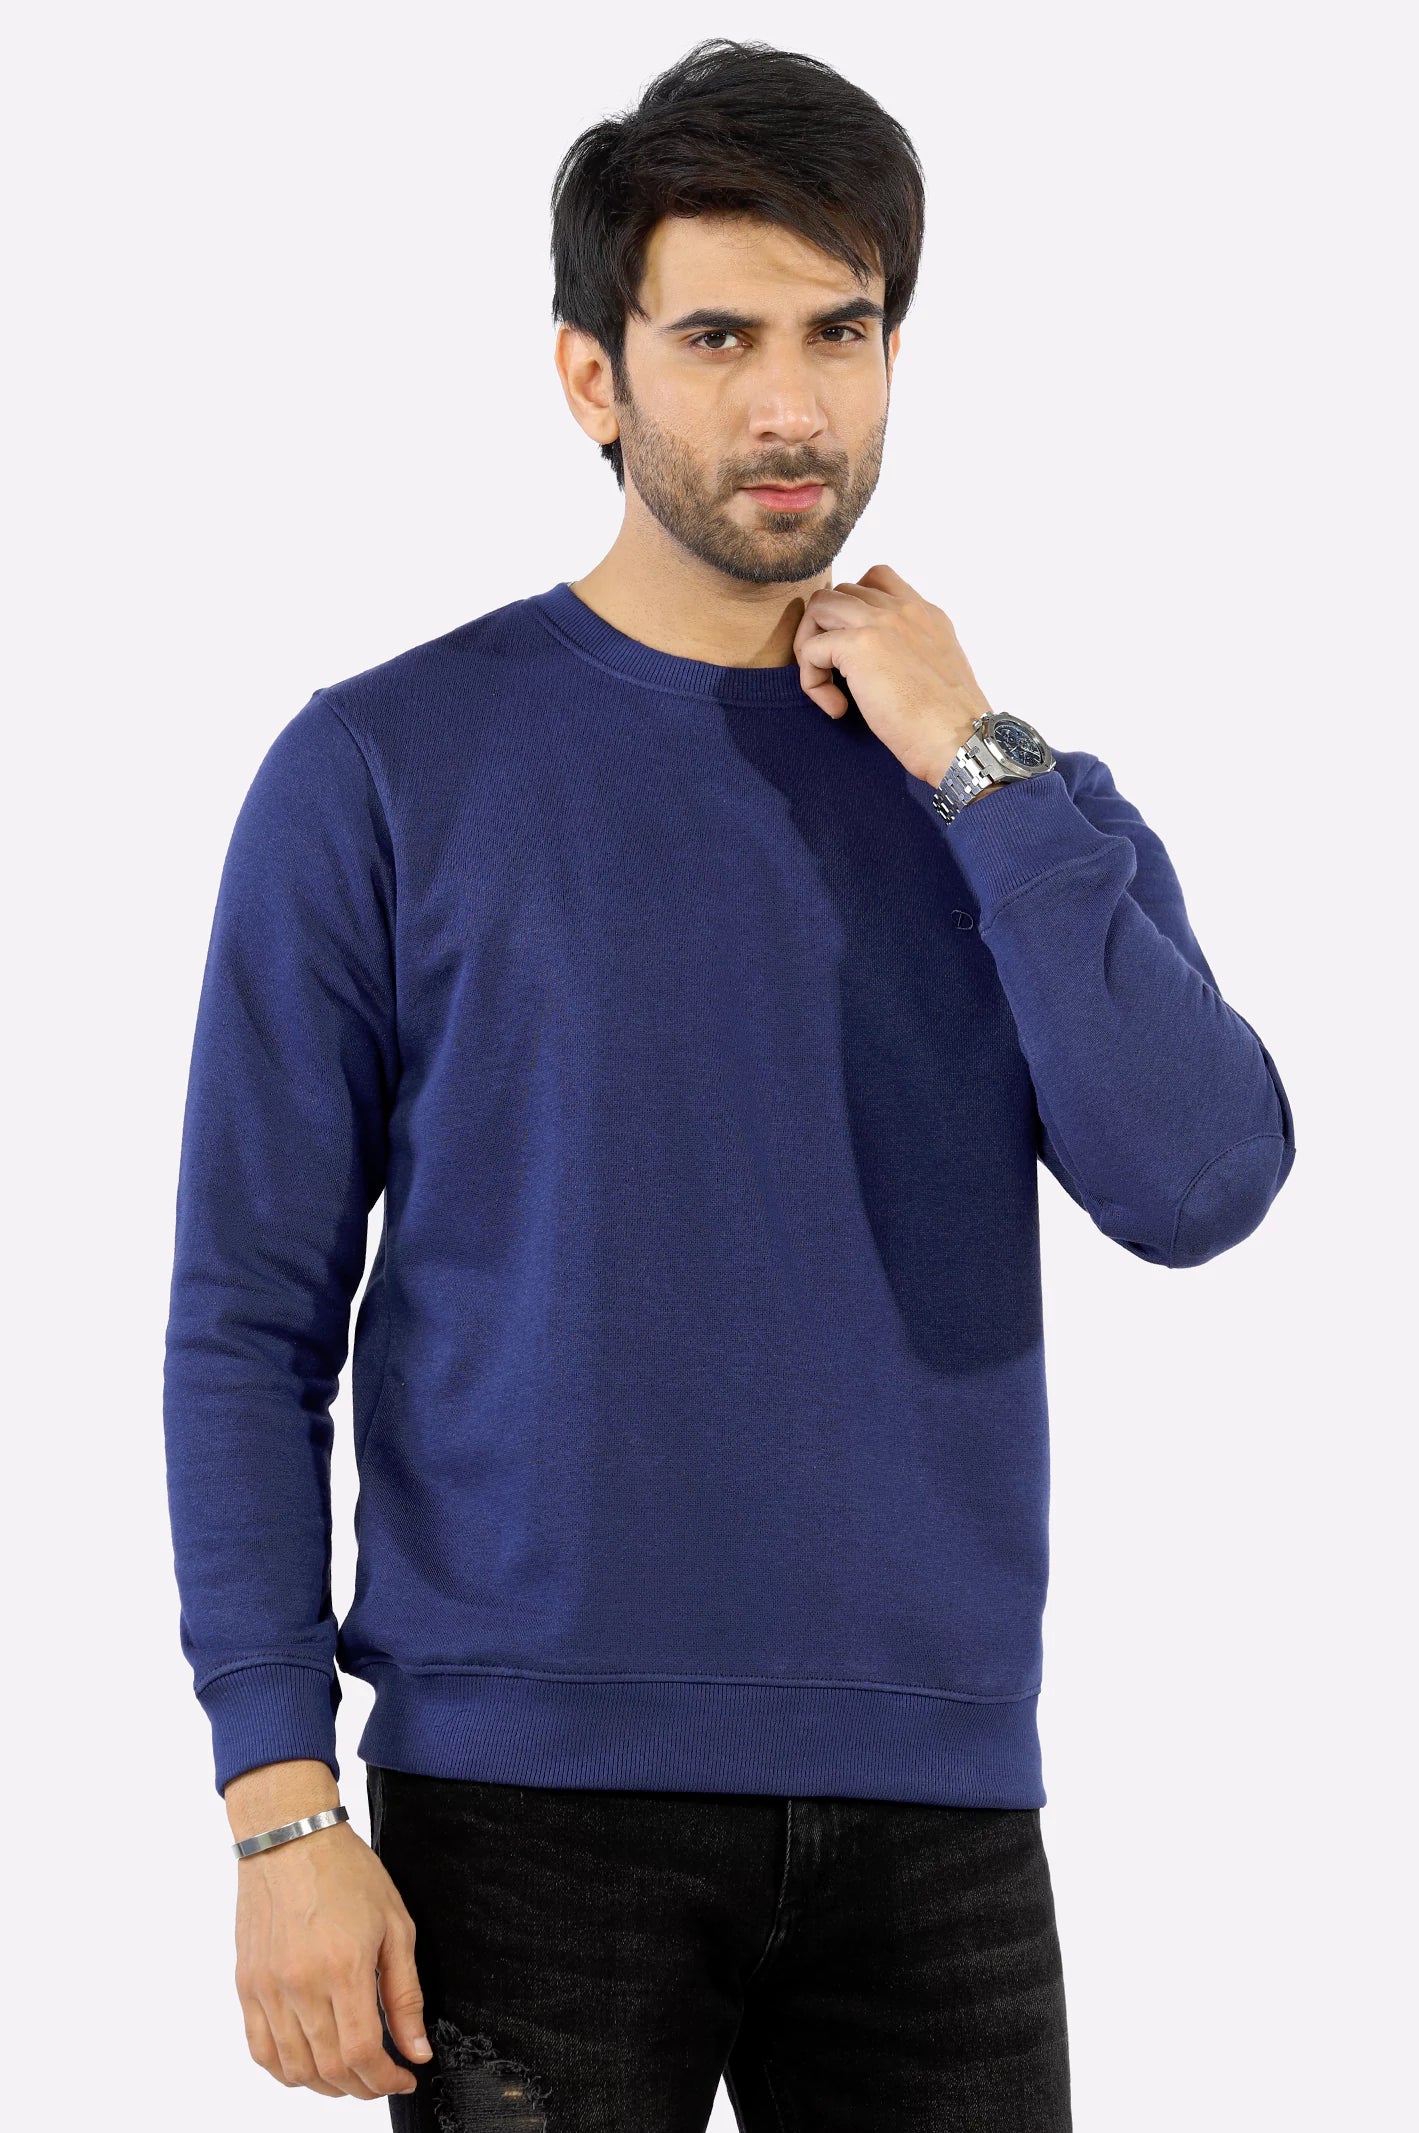 Navy Blue Basic Sweatshirt From Diners